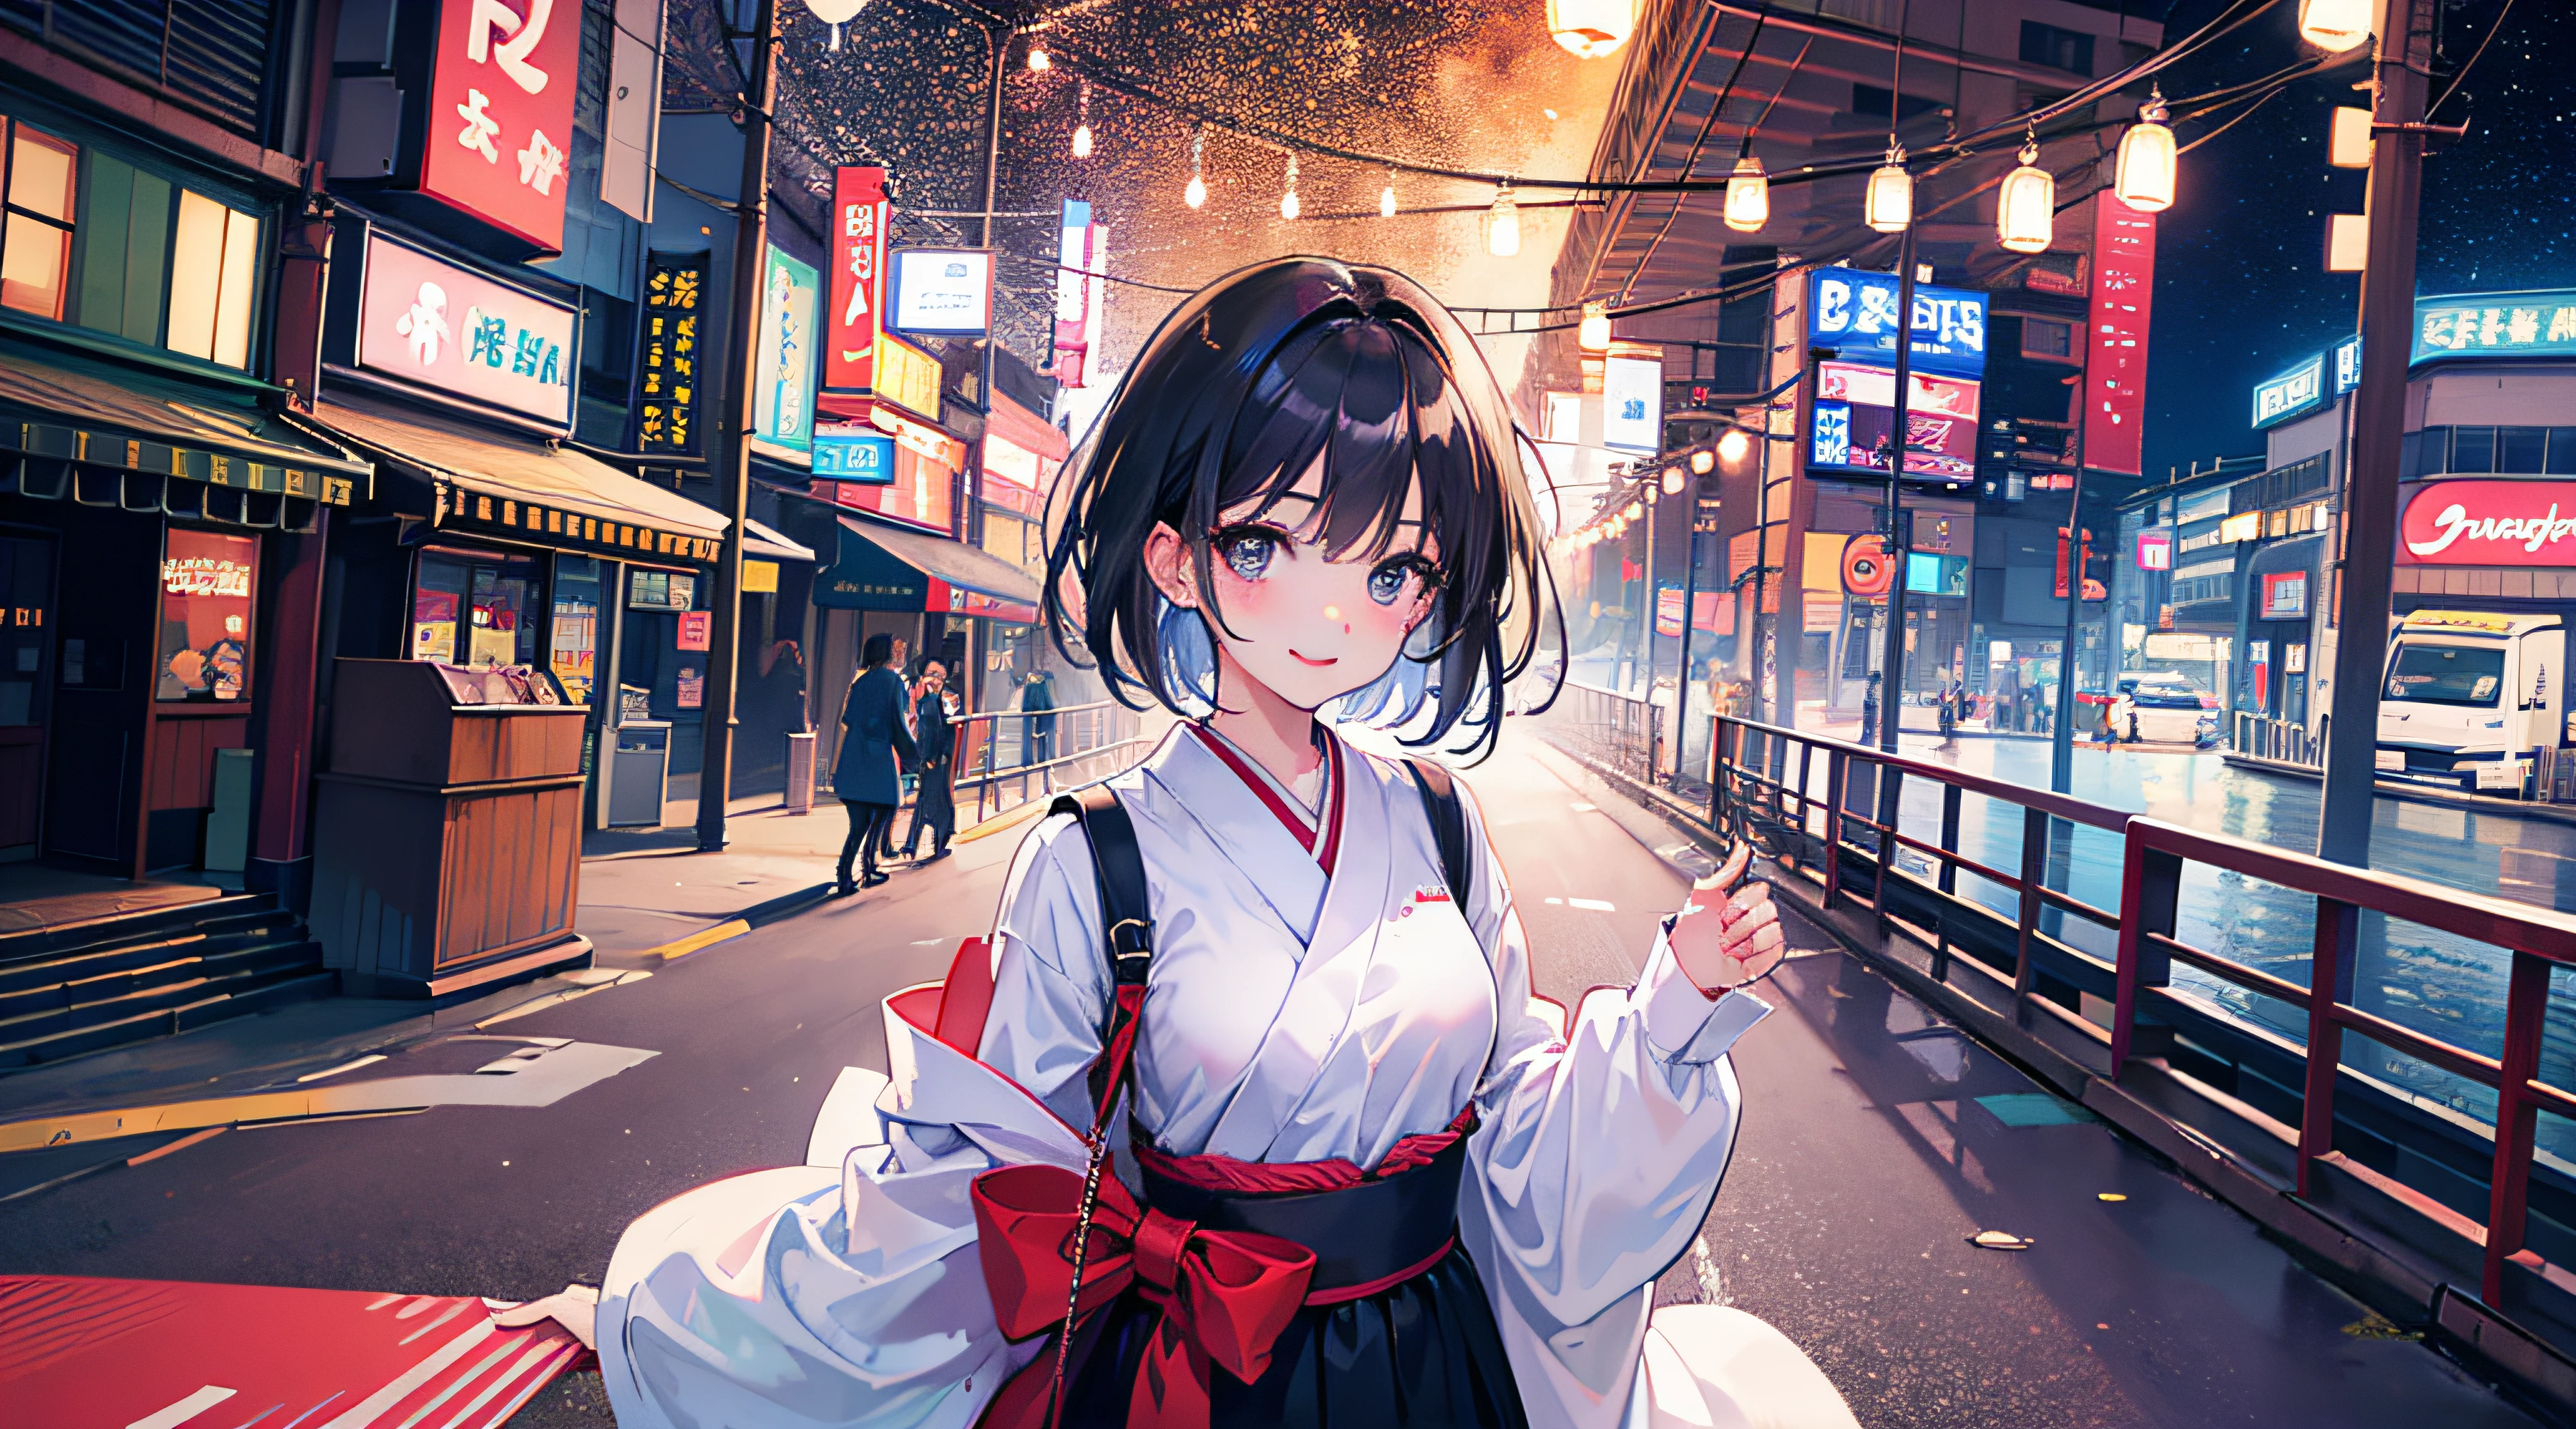 (Realistic painting style:1.0), Masterpiece, Best quality, absurderes, comic strip, illustration,
1 girl, medium hair, cute girl, young and cute girl, japanese girl, {Breasts}, 
a girl standing on a bridge with lights in the background, with short hair, in tokyo, in tokyo at night, in carnival, carnival, (smile:1.0)